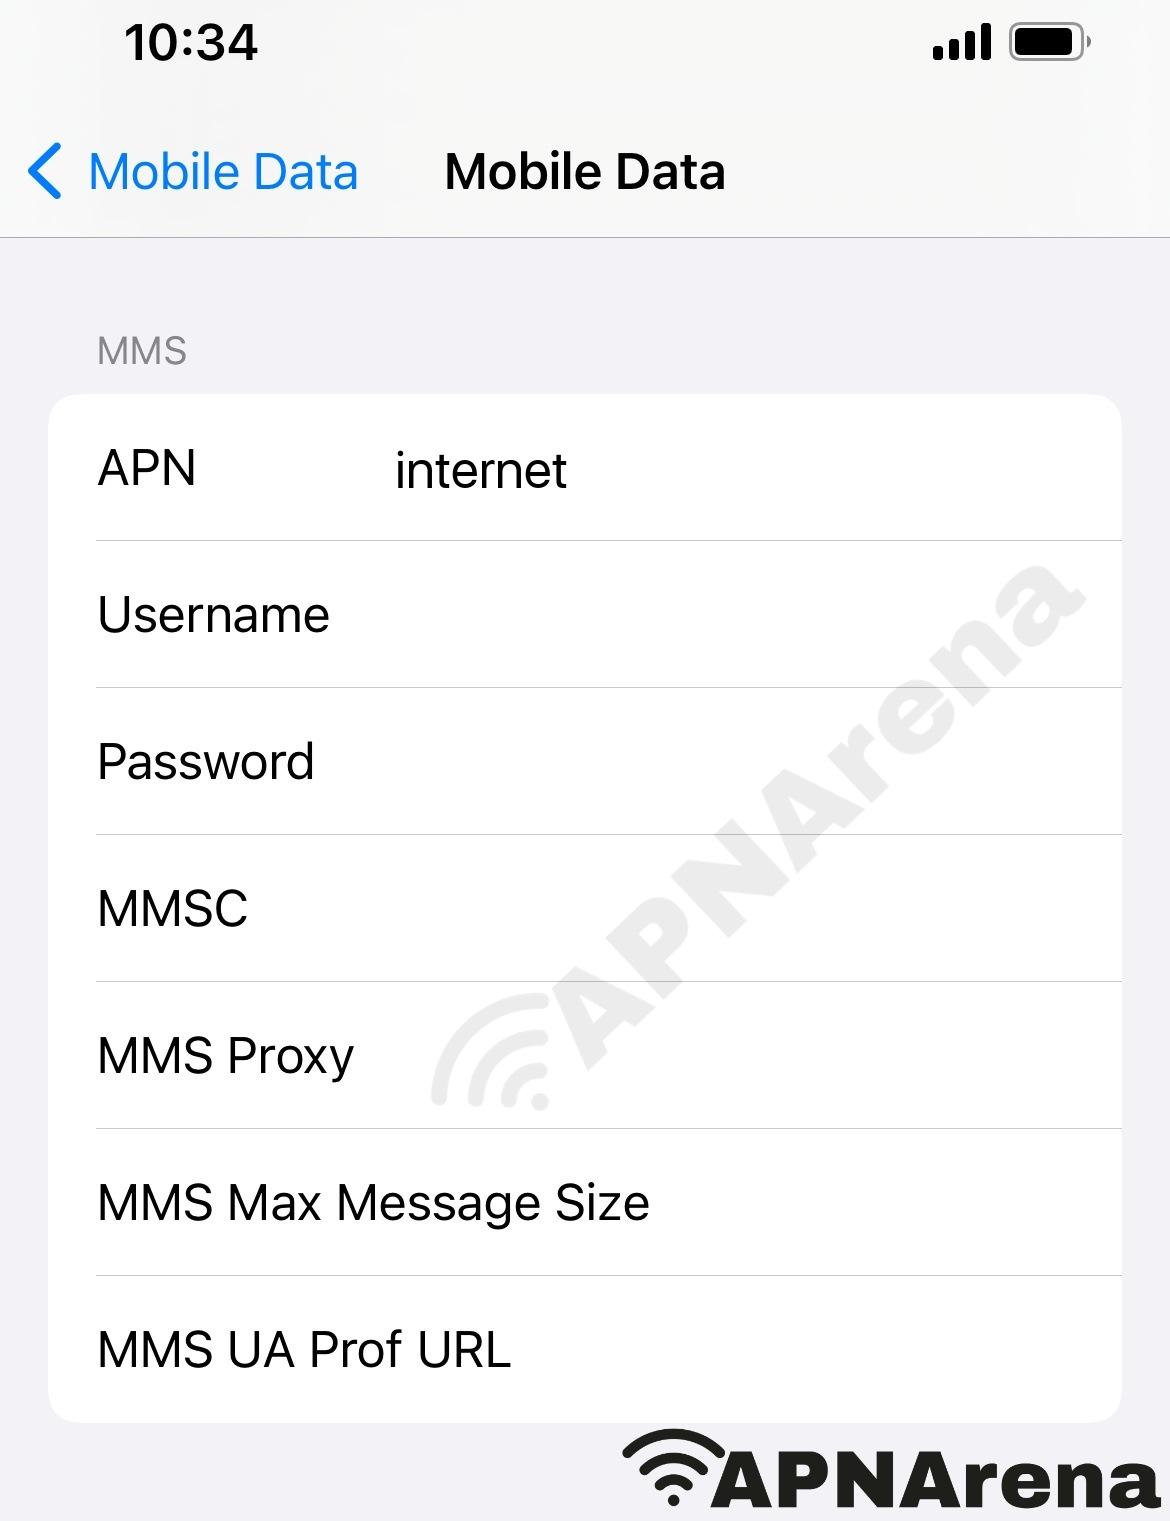 AlwaysOnline Wireless MMS Settings for iPhone